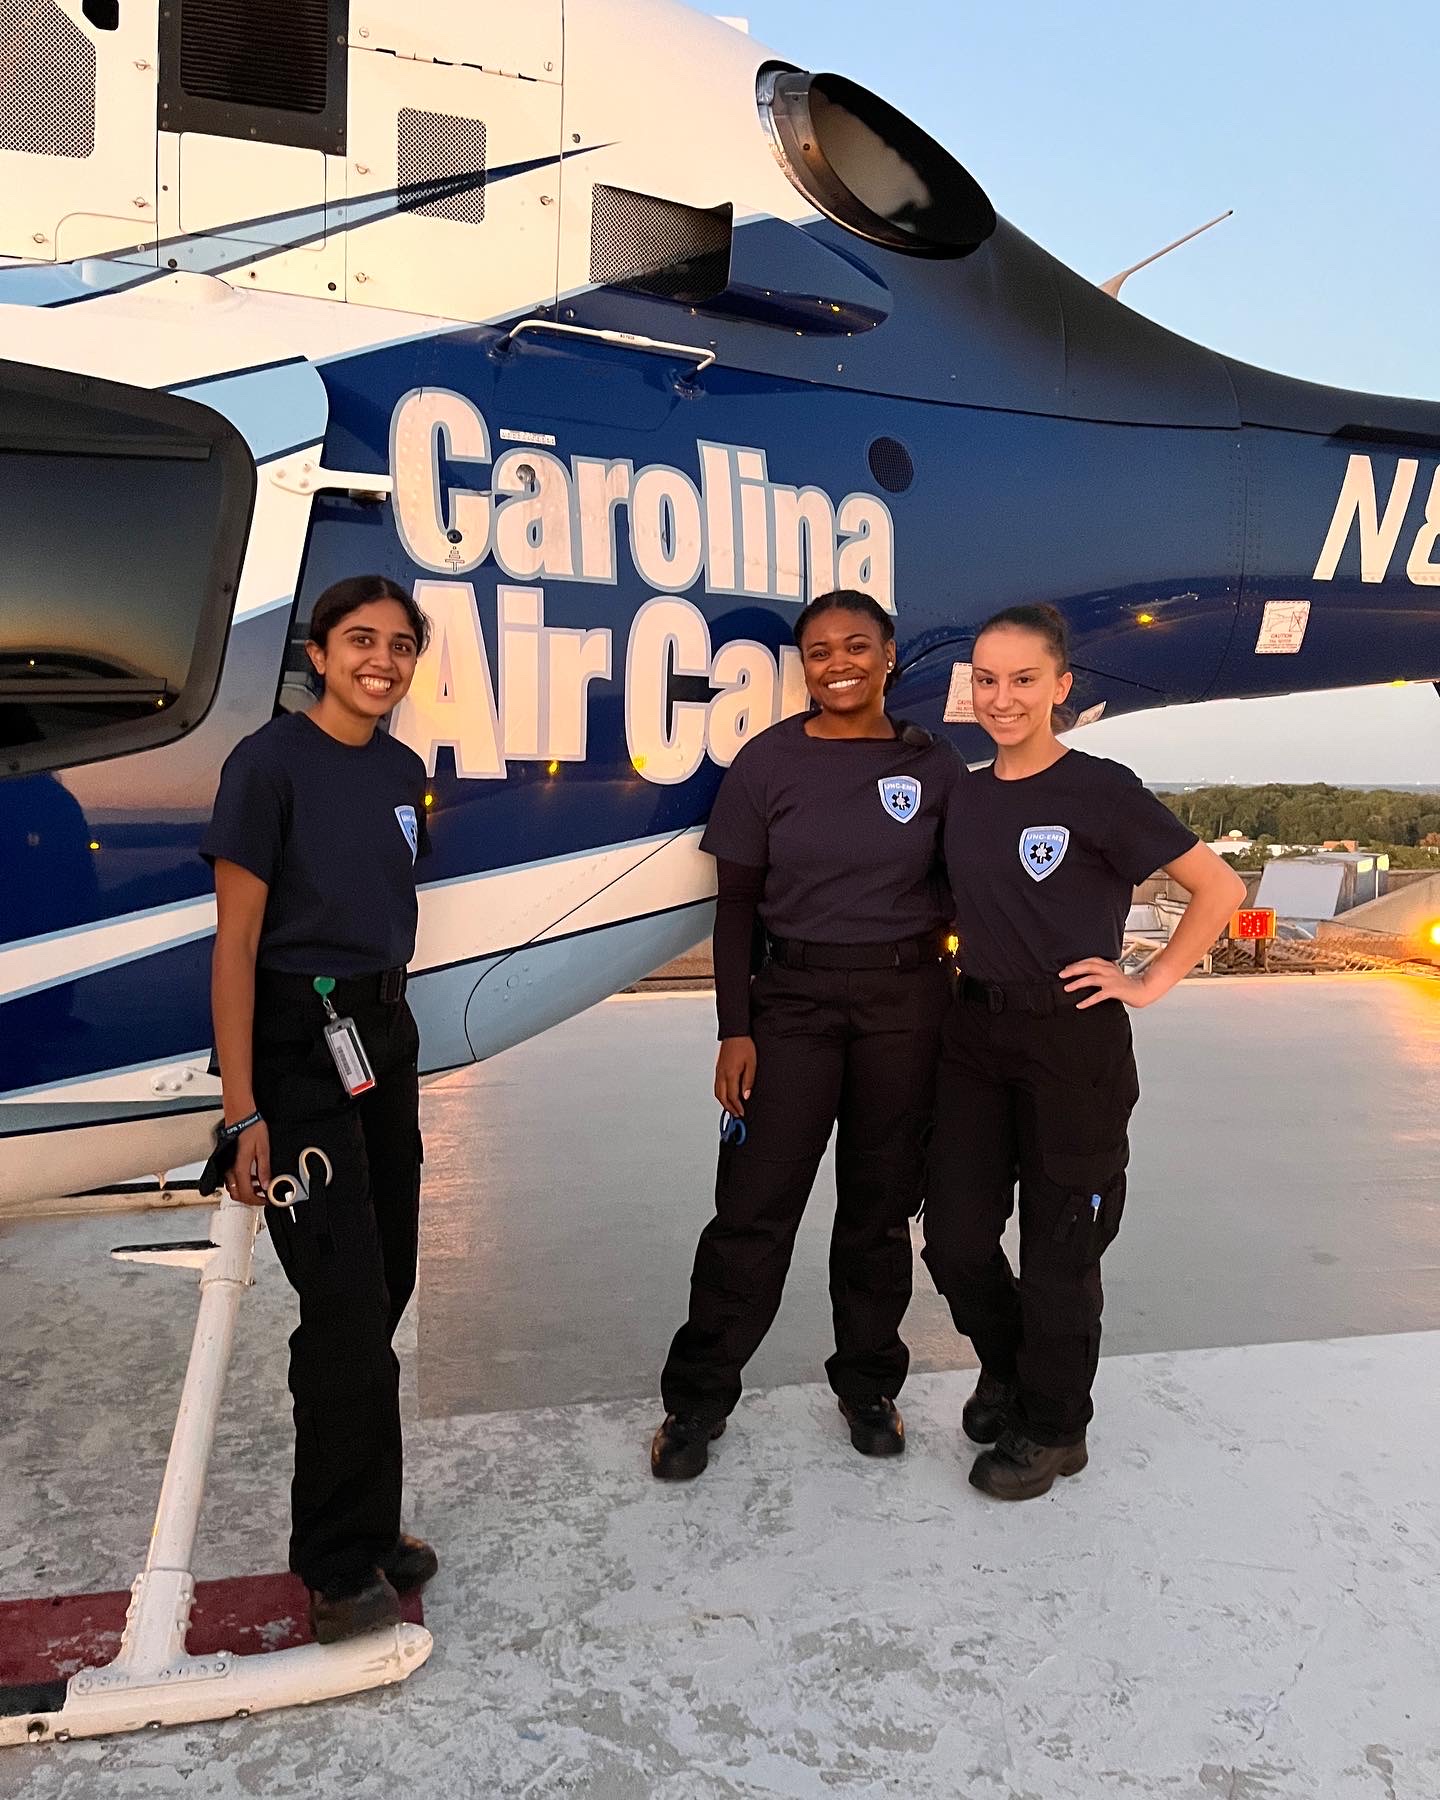 Training with UNC Air Care